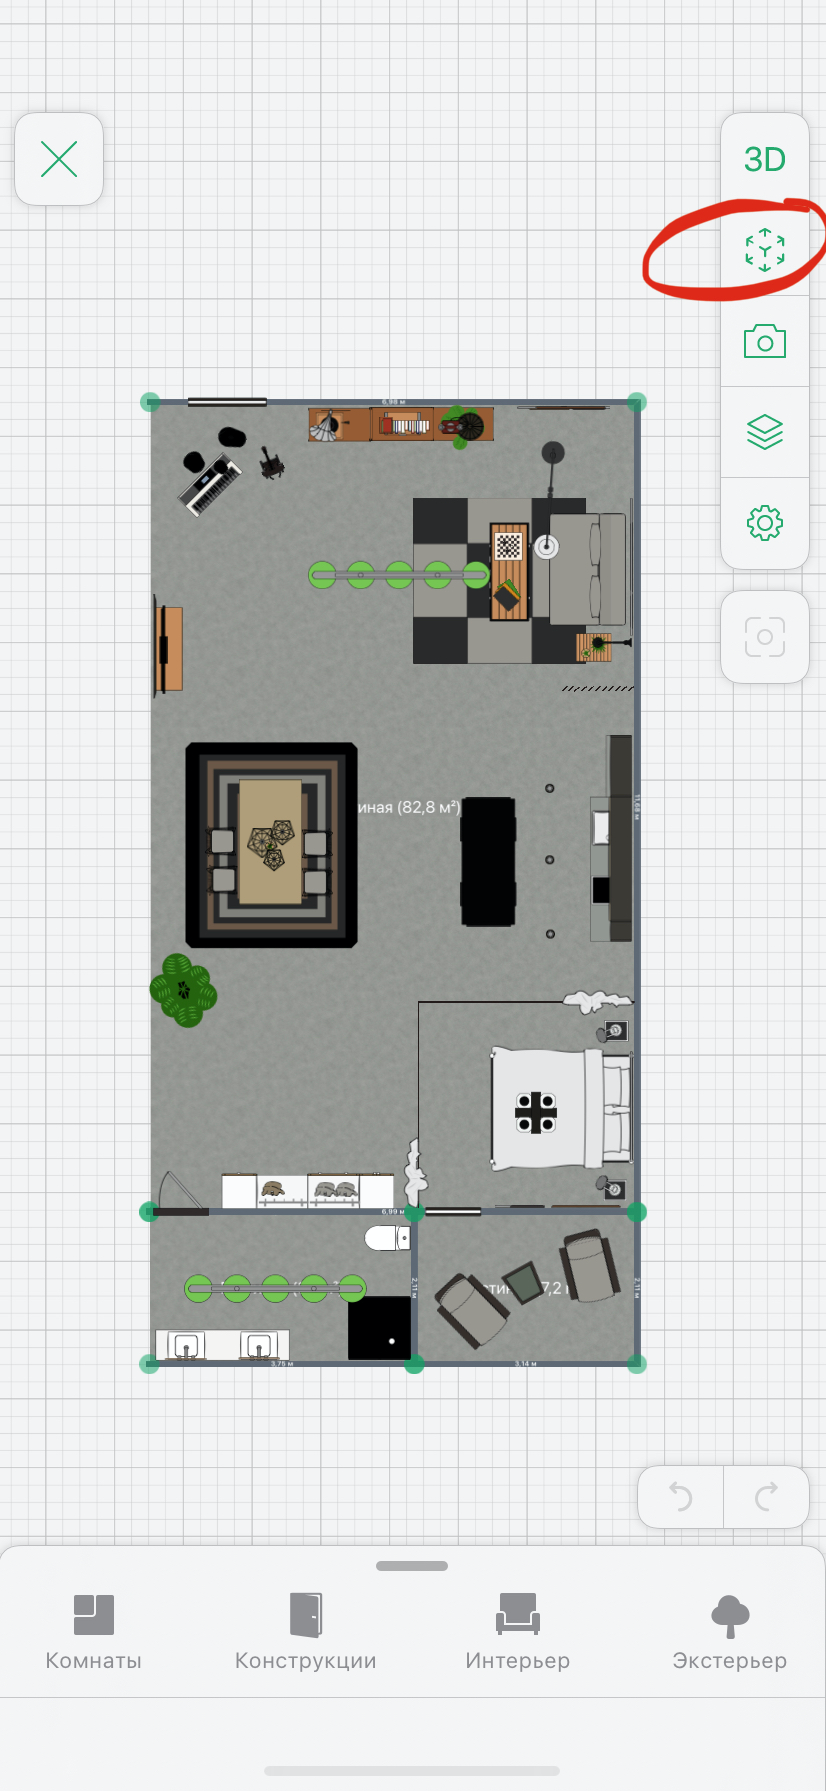 Personal Experience: How to Use the Planner 5D’s AR Feature - Articles about Apartments 4 by  image